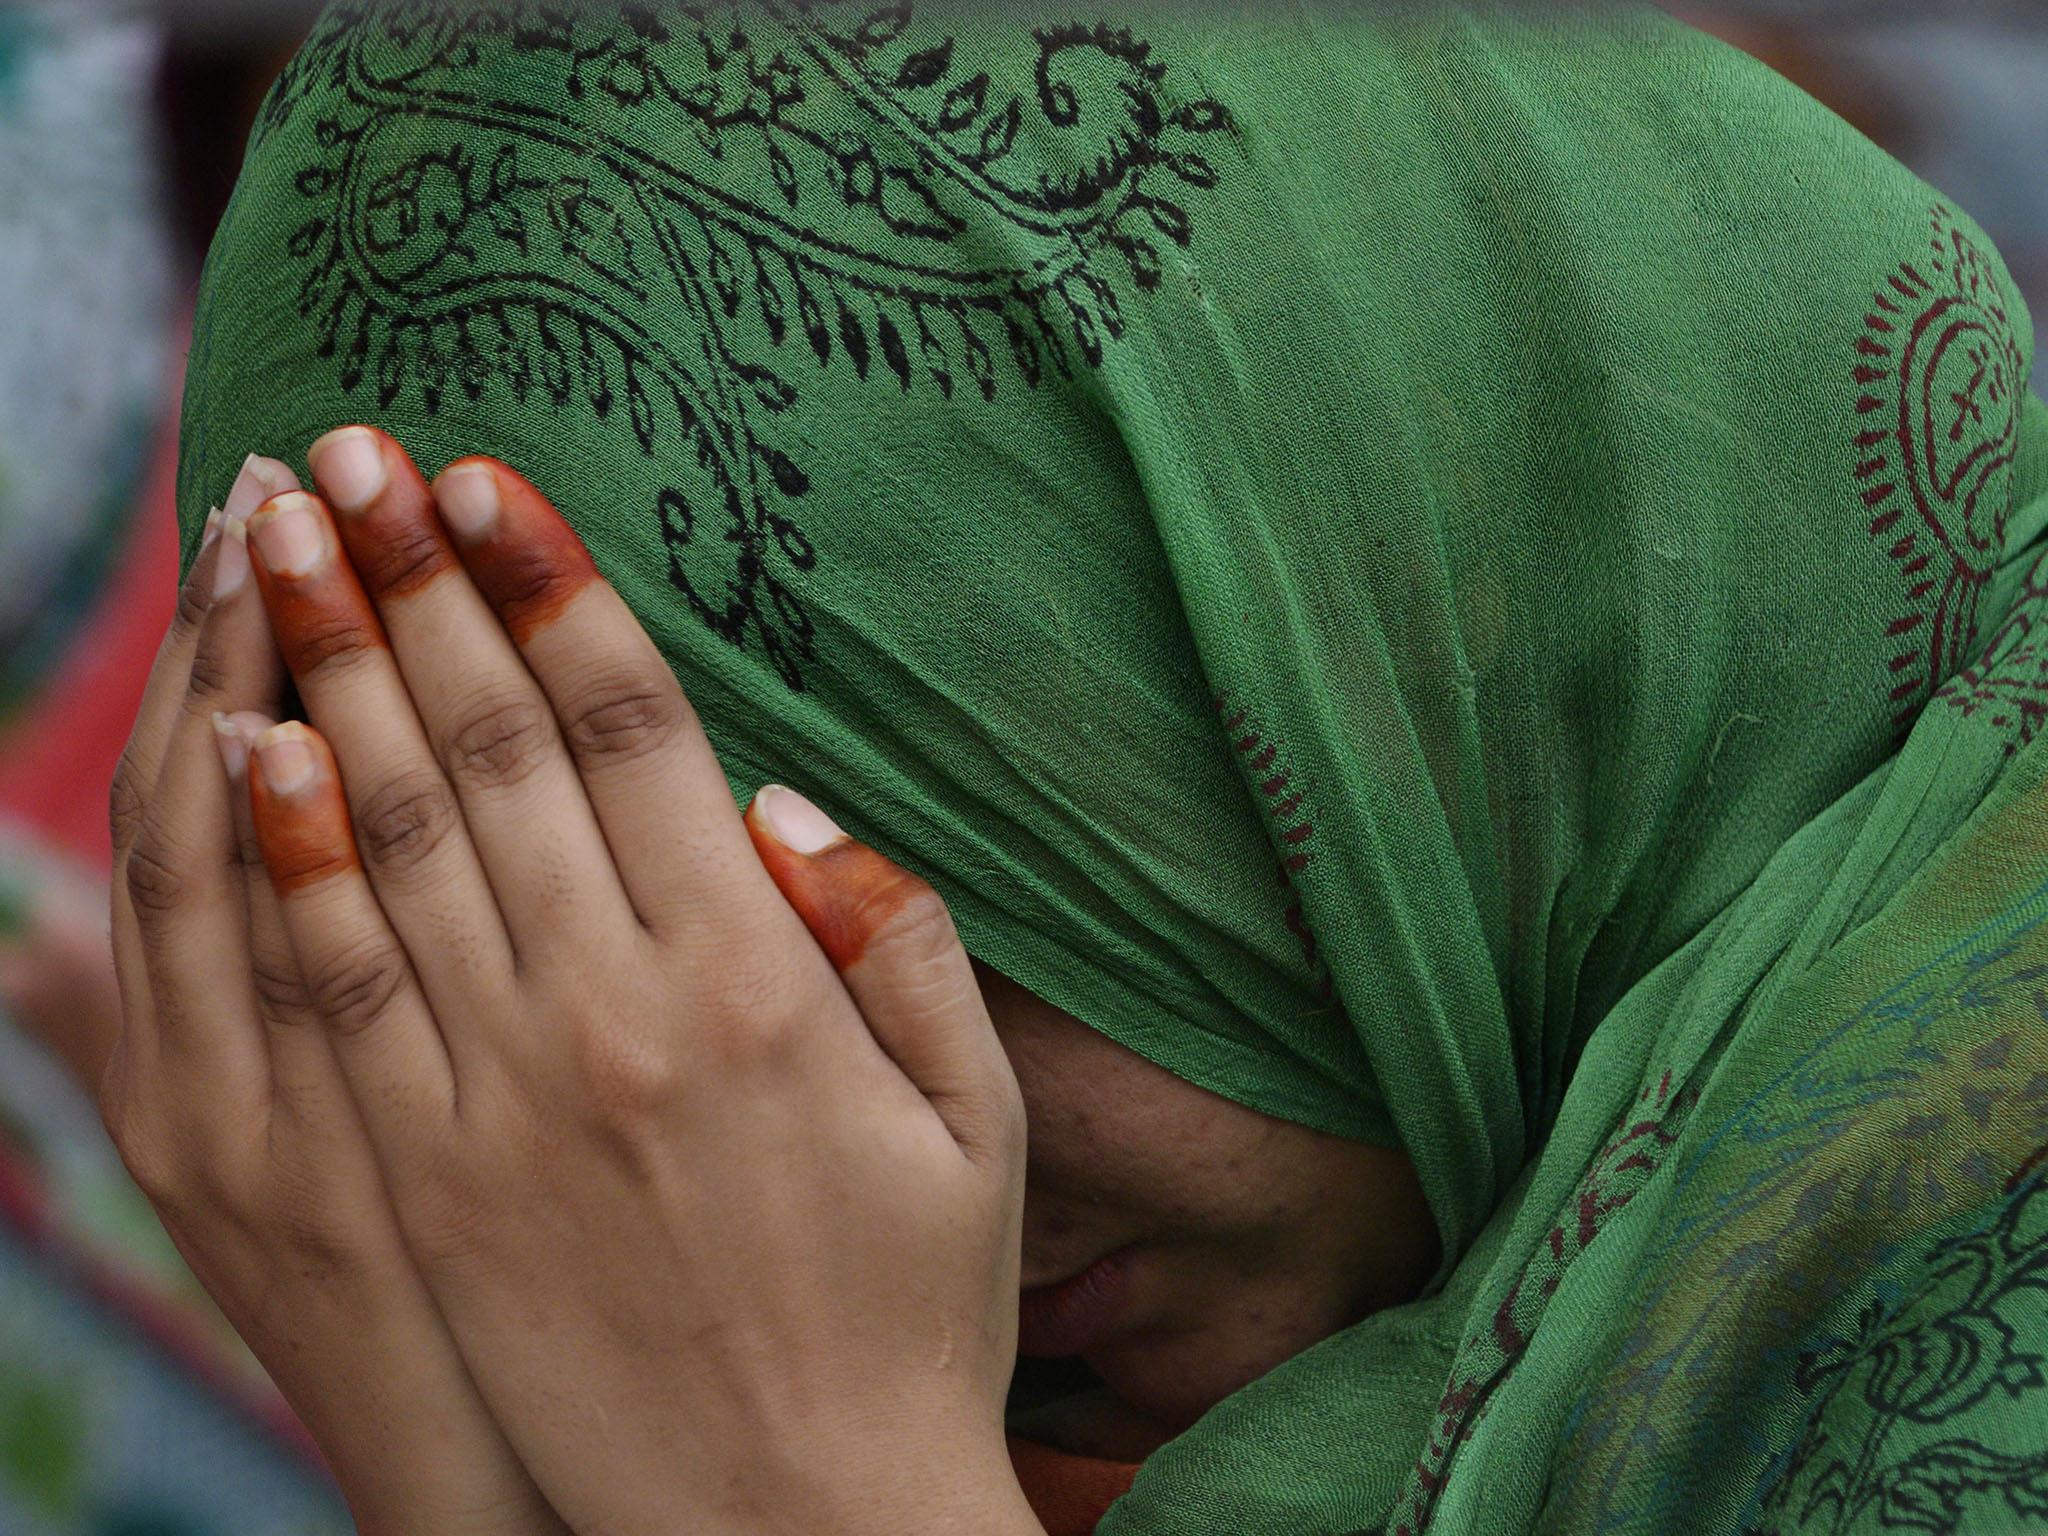 Islamic schools in Pakistan plagued by child sex abuse, investigation finds The Independent The Independent pic pic